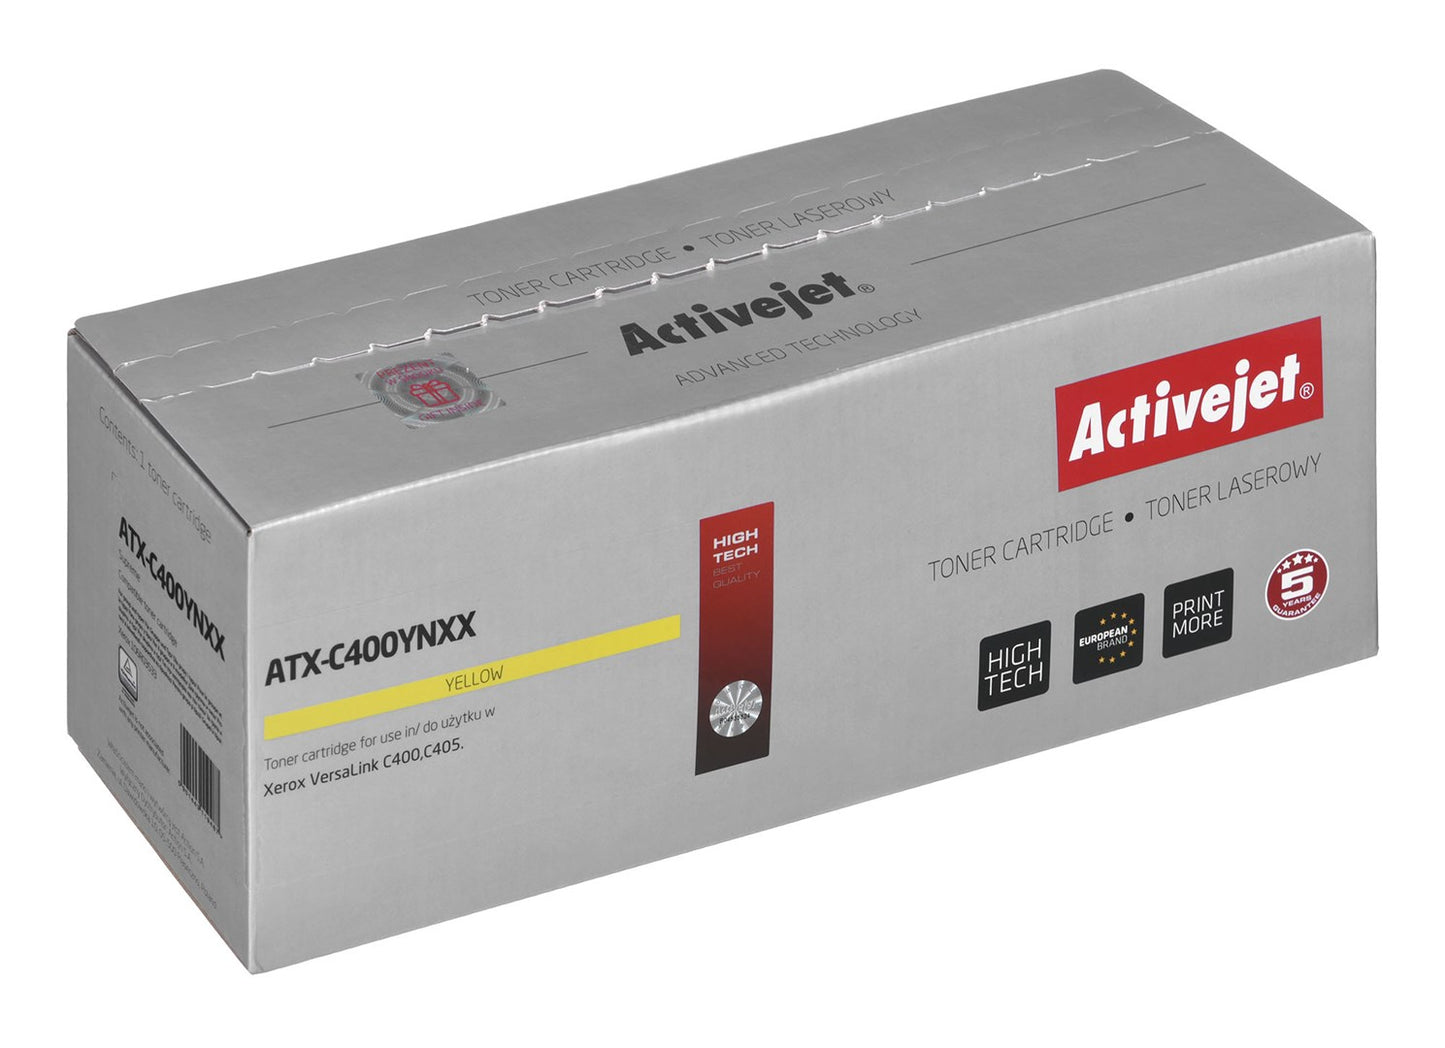 Activejet ATX-C400YNXX toner (replacement for Xerox 106R03533, Supreme, 8000 pages, yellow) - KorhoneCom